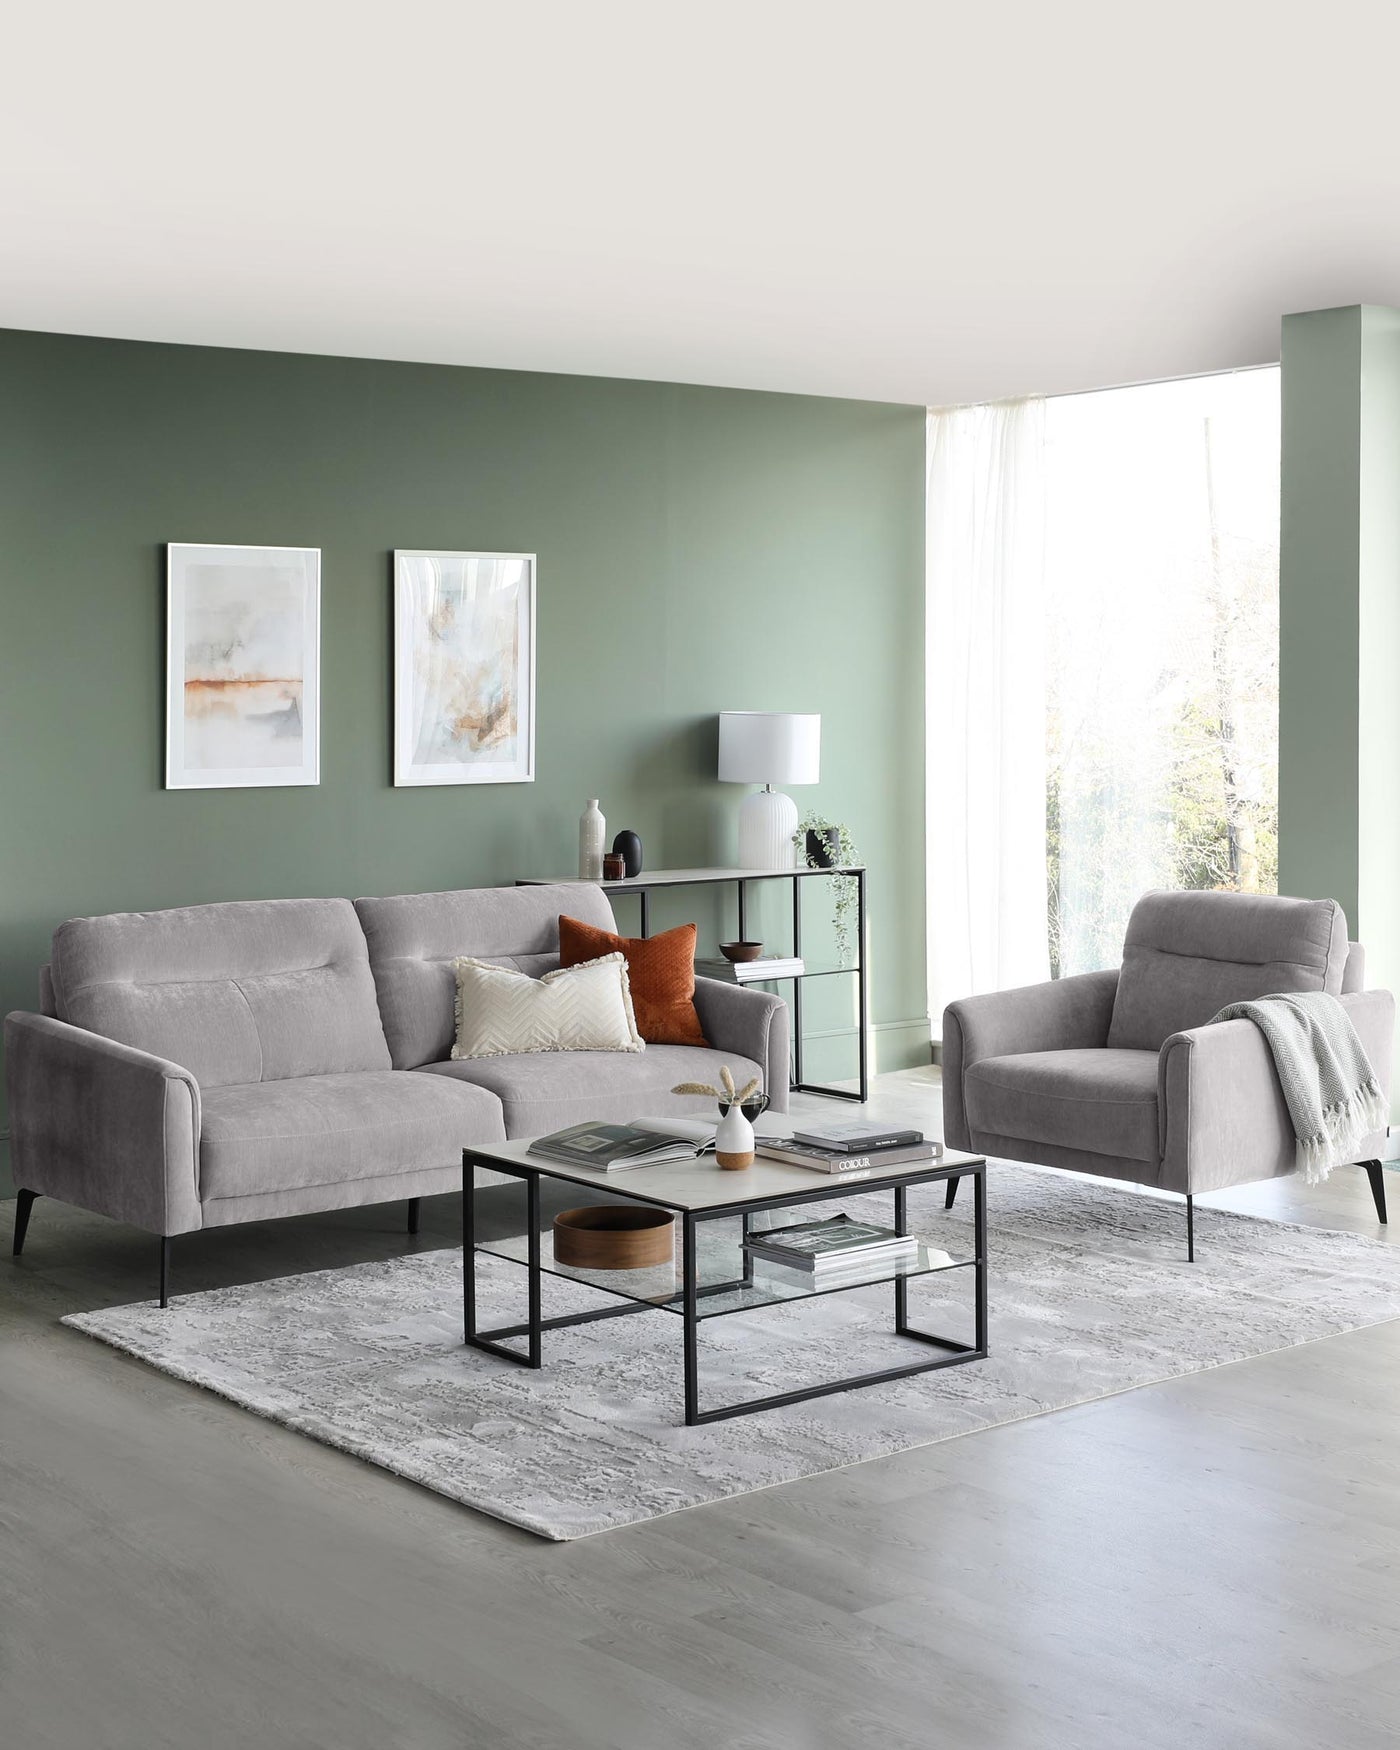 Modern living room furniture featuring a grey fabric three-seater sofa and a matching armchair with sleek metal legs, accompanied by a set of two black metal-framed coffee tables with glass tops, and a coordinating metal-framed side table with a glass top and a lower shelf. A soft grey area rug anchors the arrangement on a light wood floor.